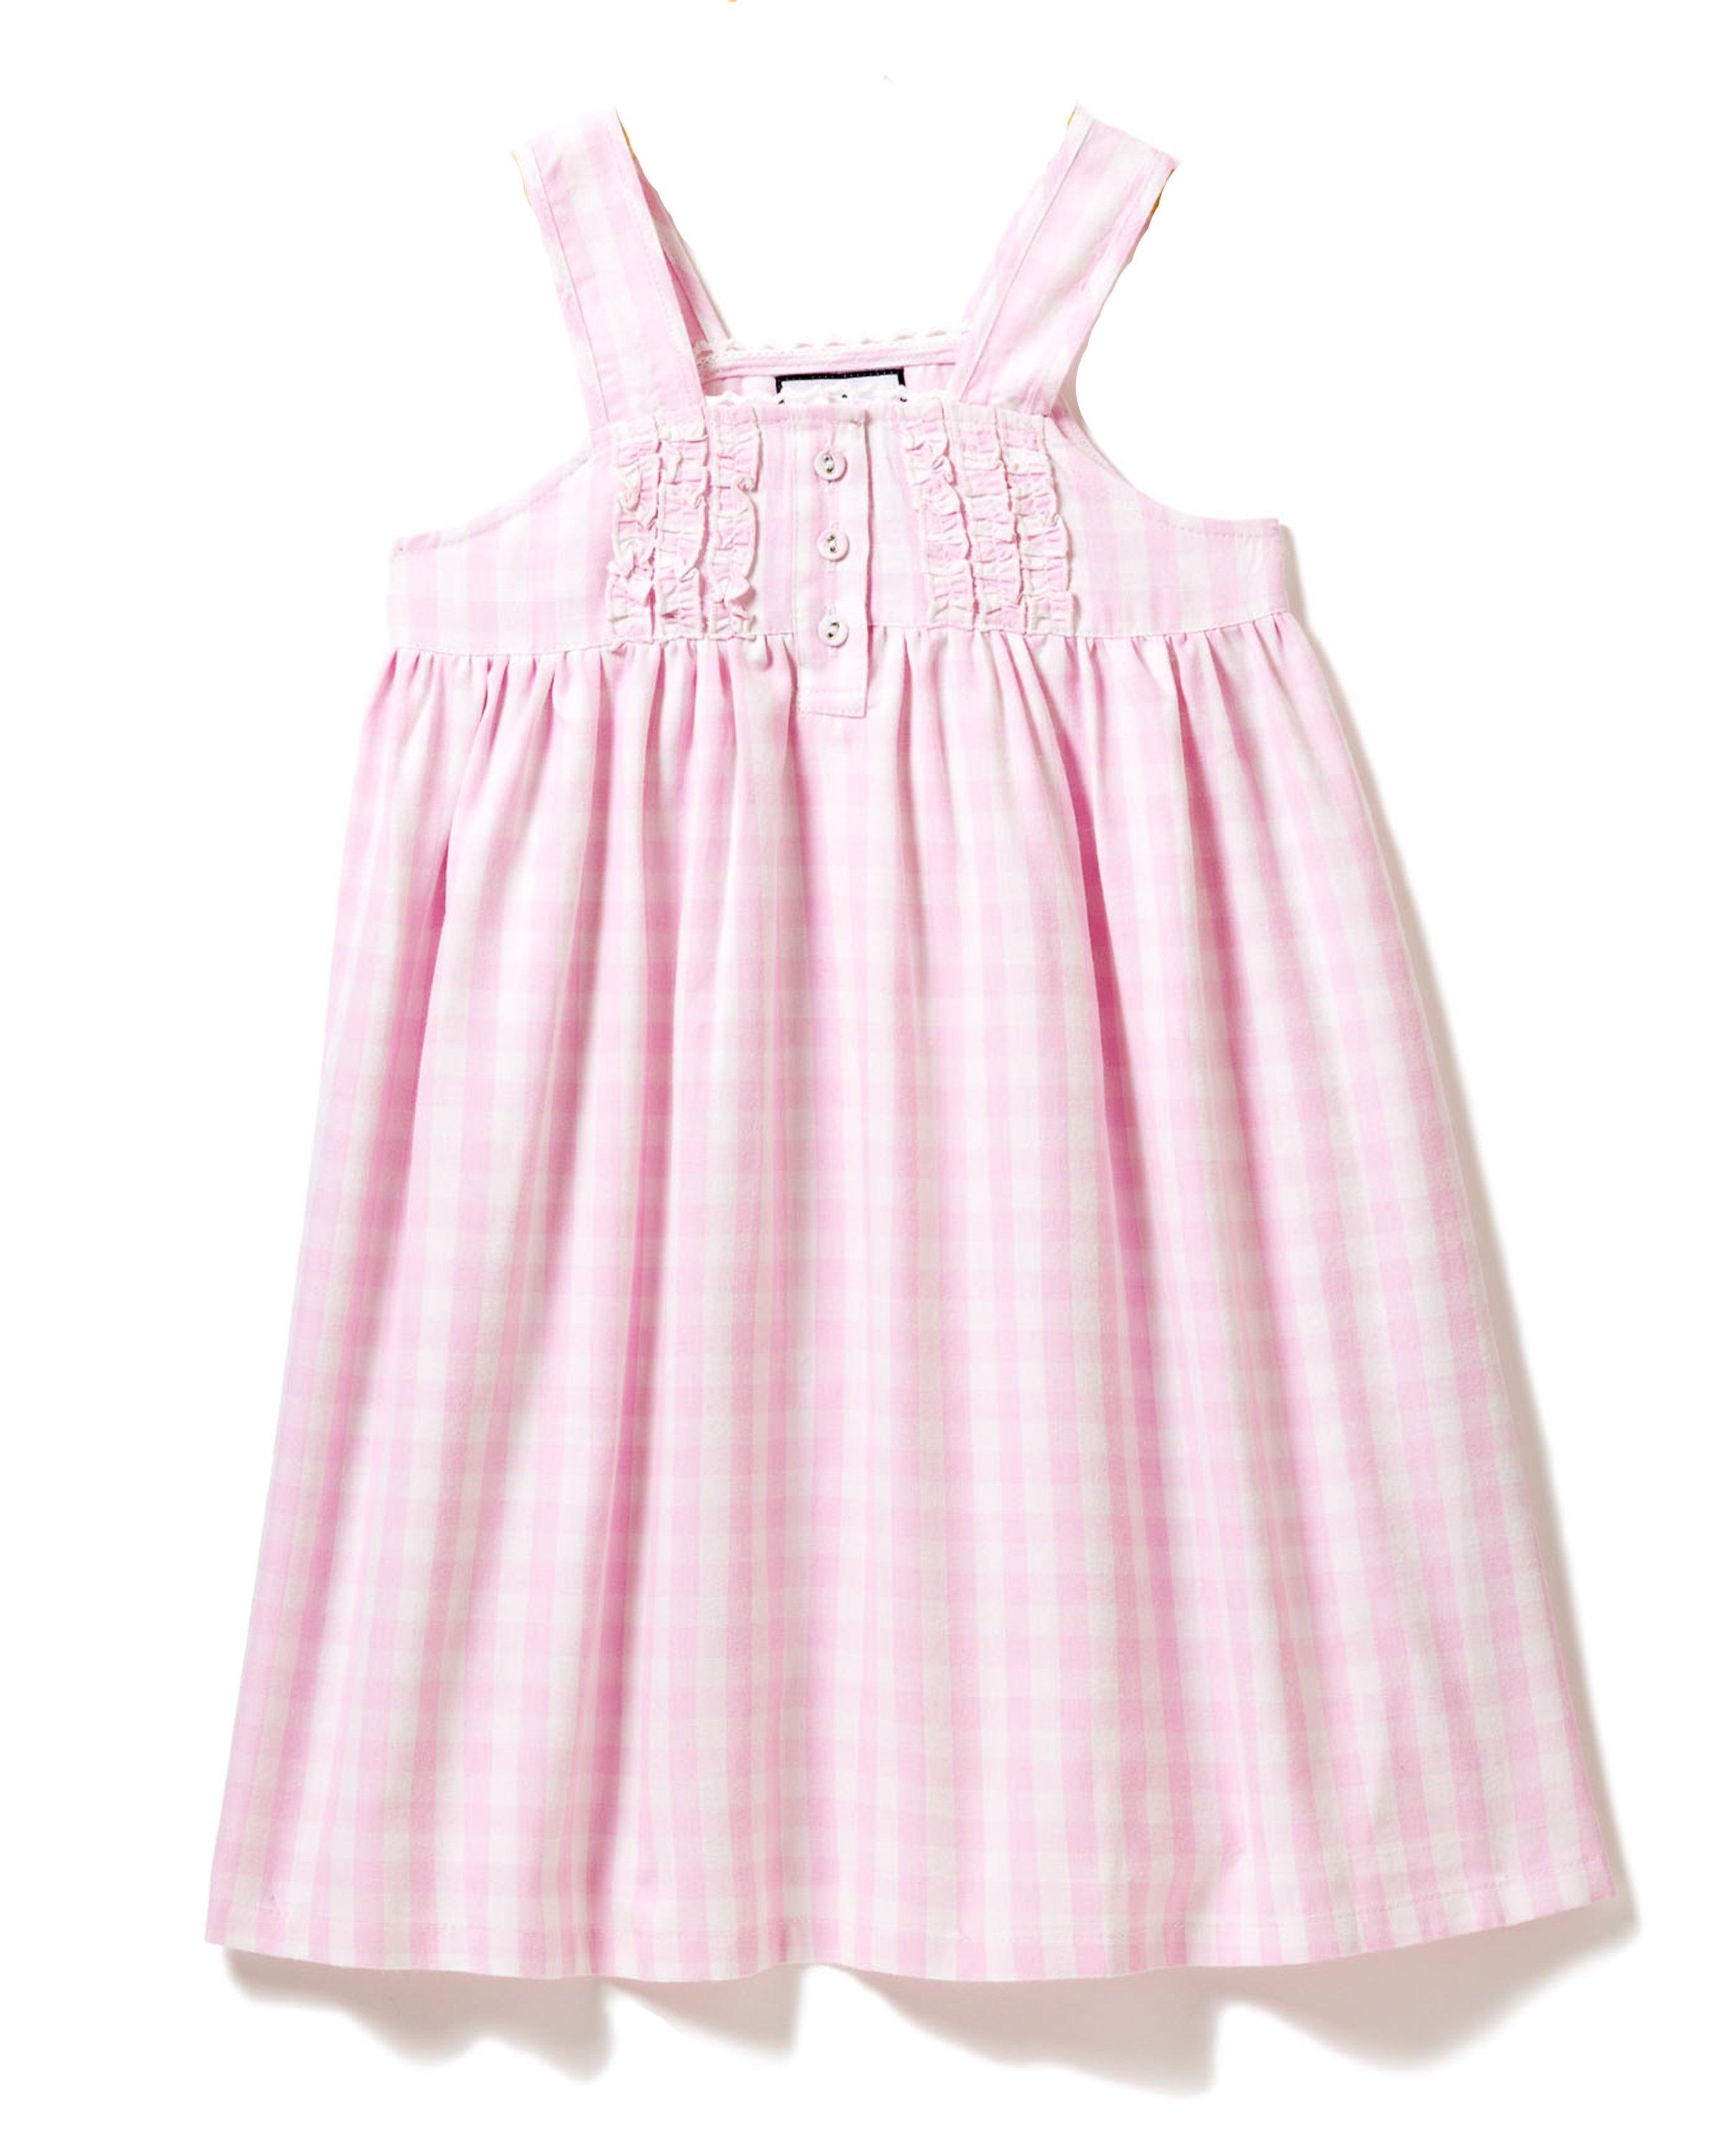 Petite Plume Gingham Charlotte Nightgown image number 0